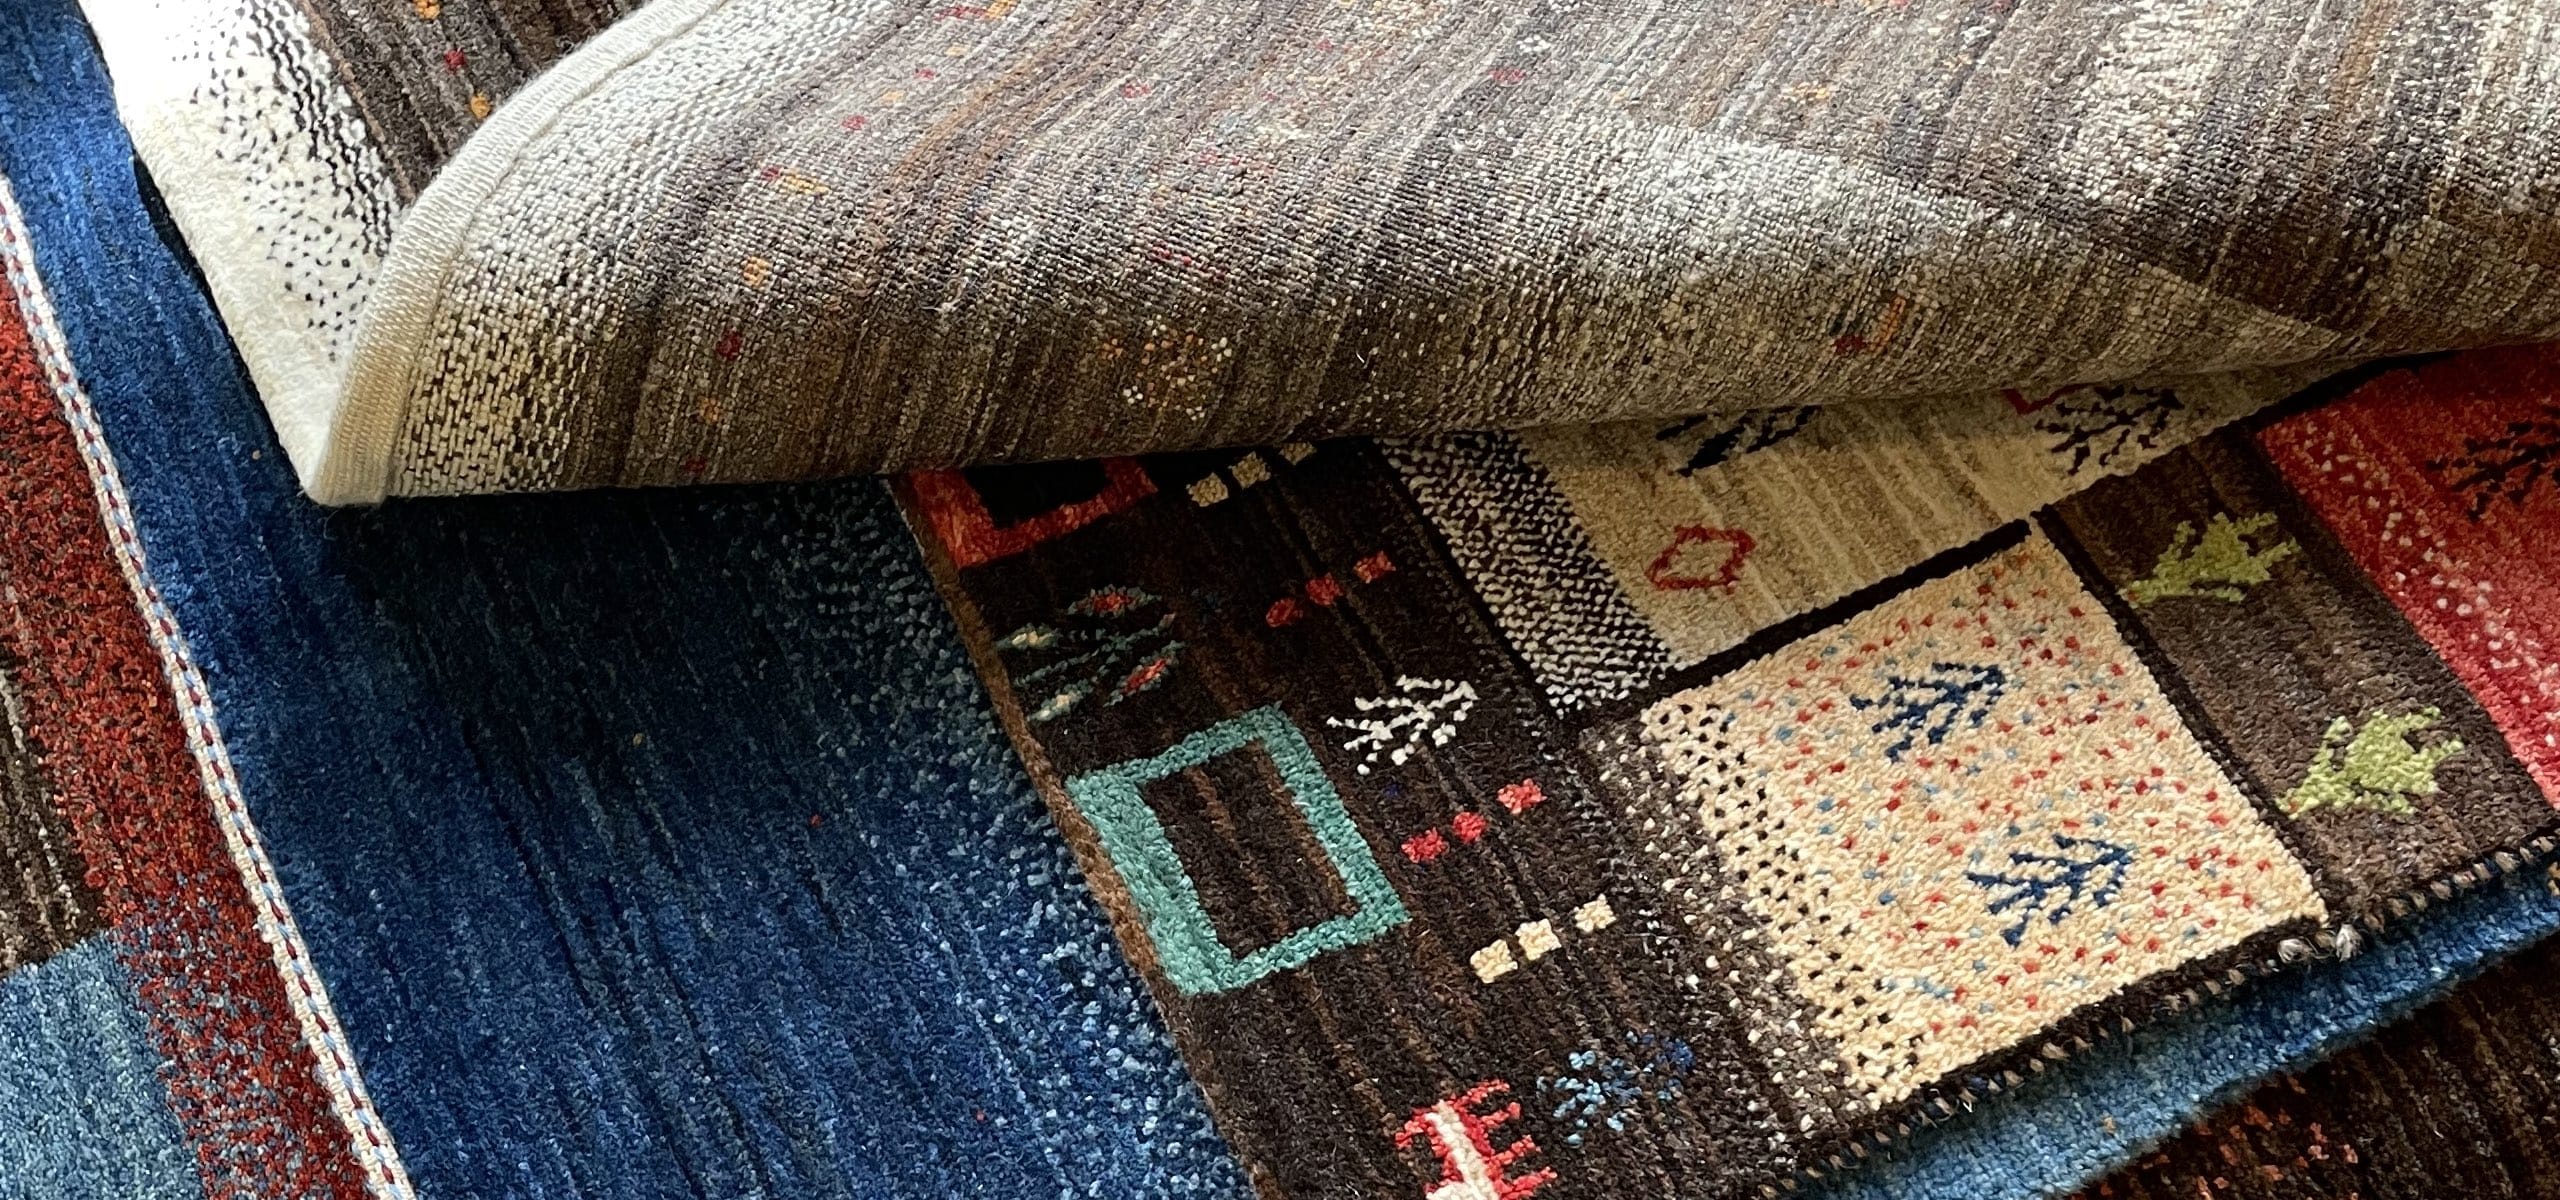 Beyond the Surface: The Definitive Guide to the Artistry of the Gabbeh Rug